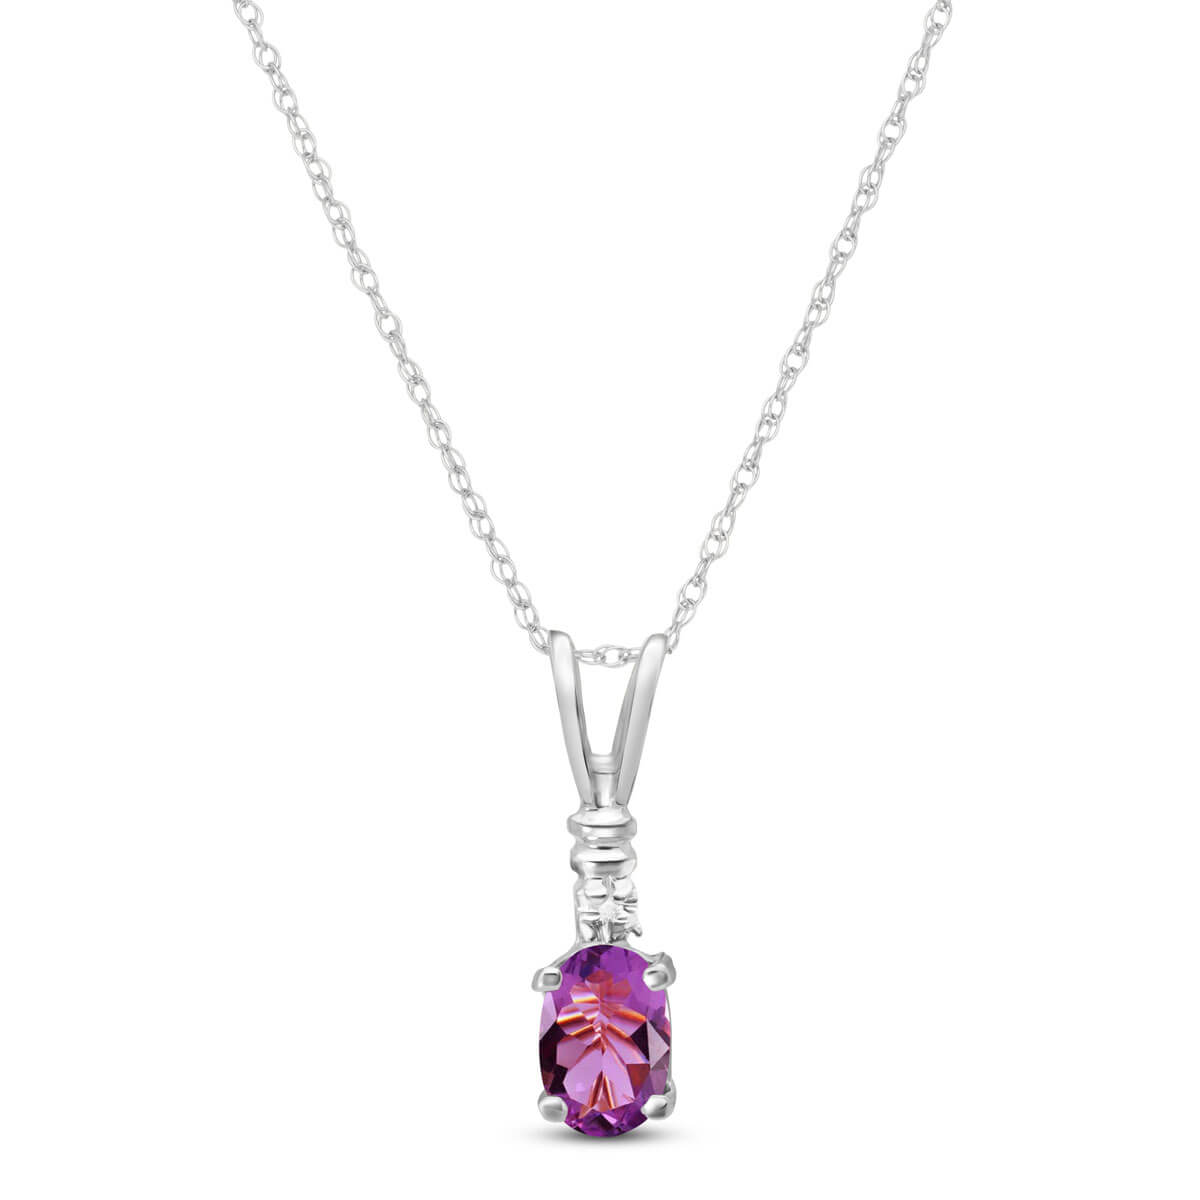 Amethyst & Diamond Cap Oval Pendant Necklace in 9ct White Gold